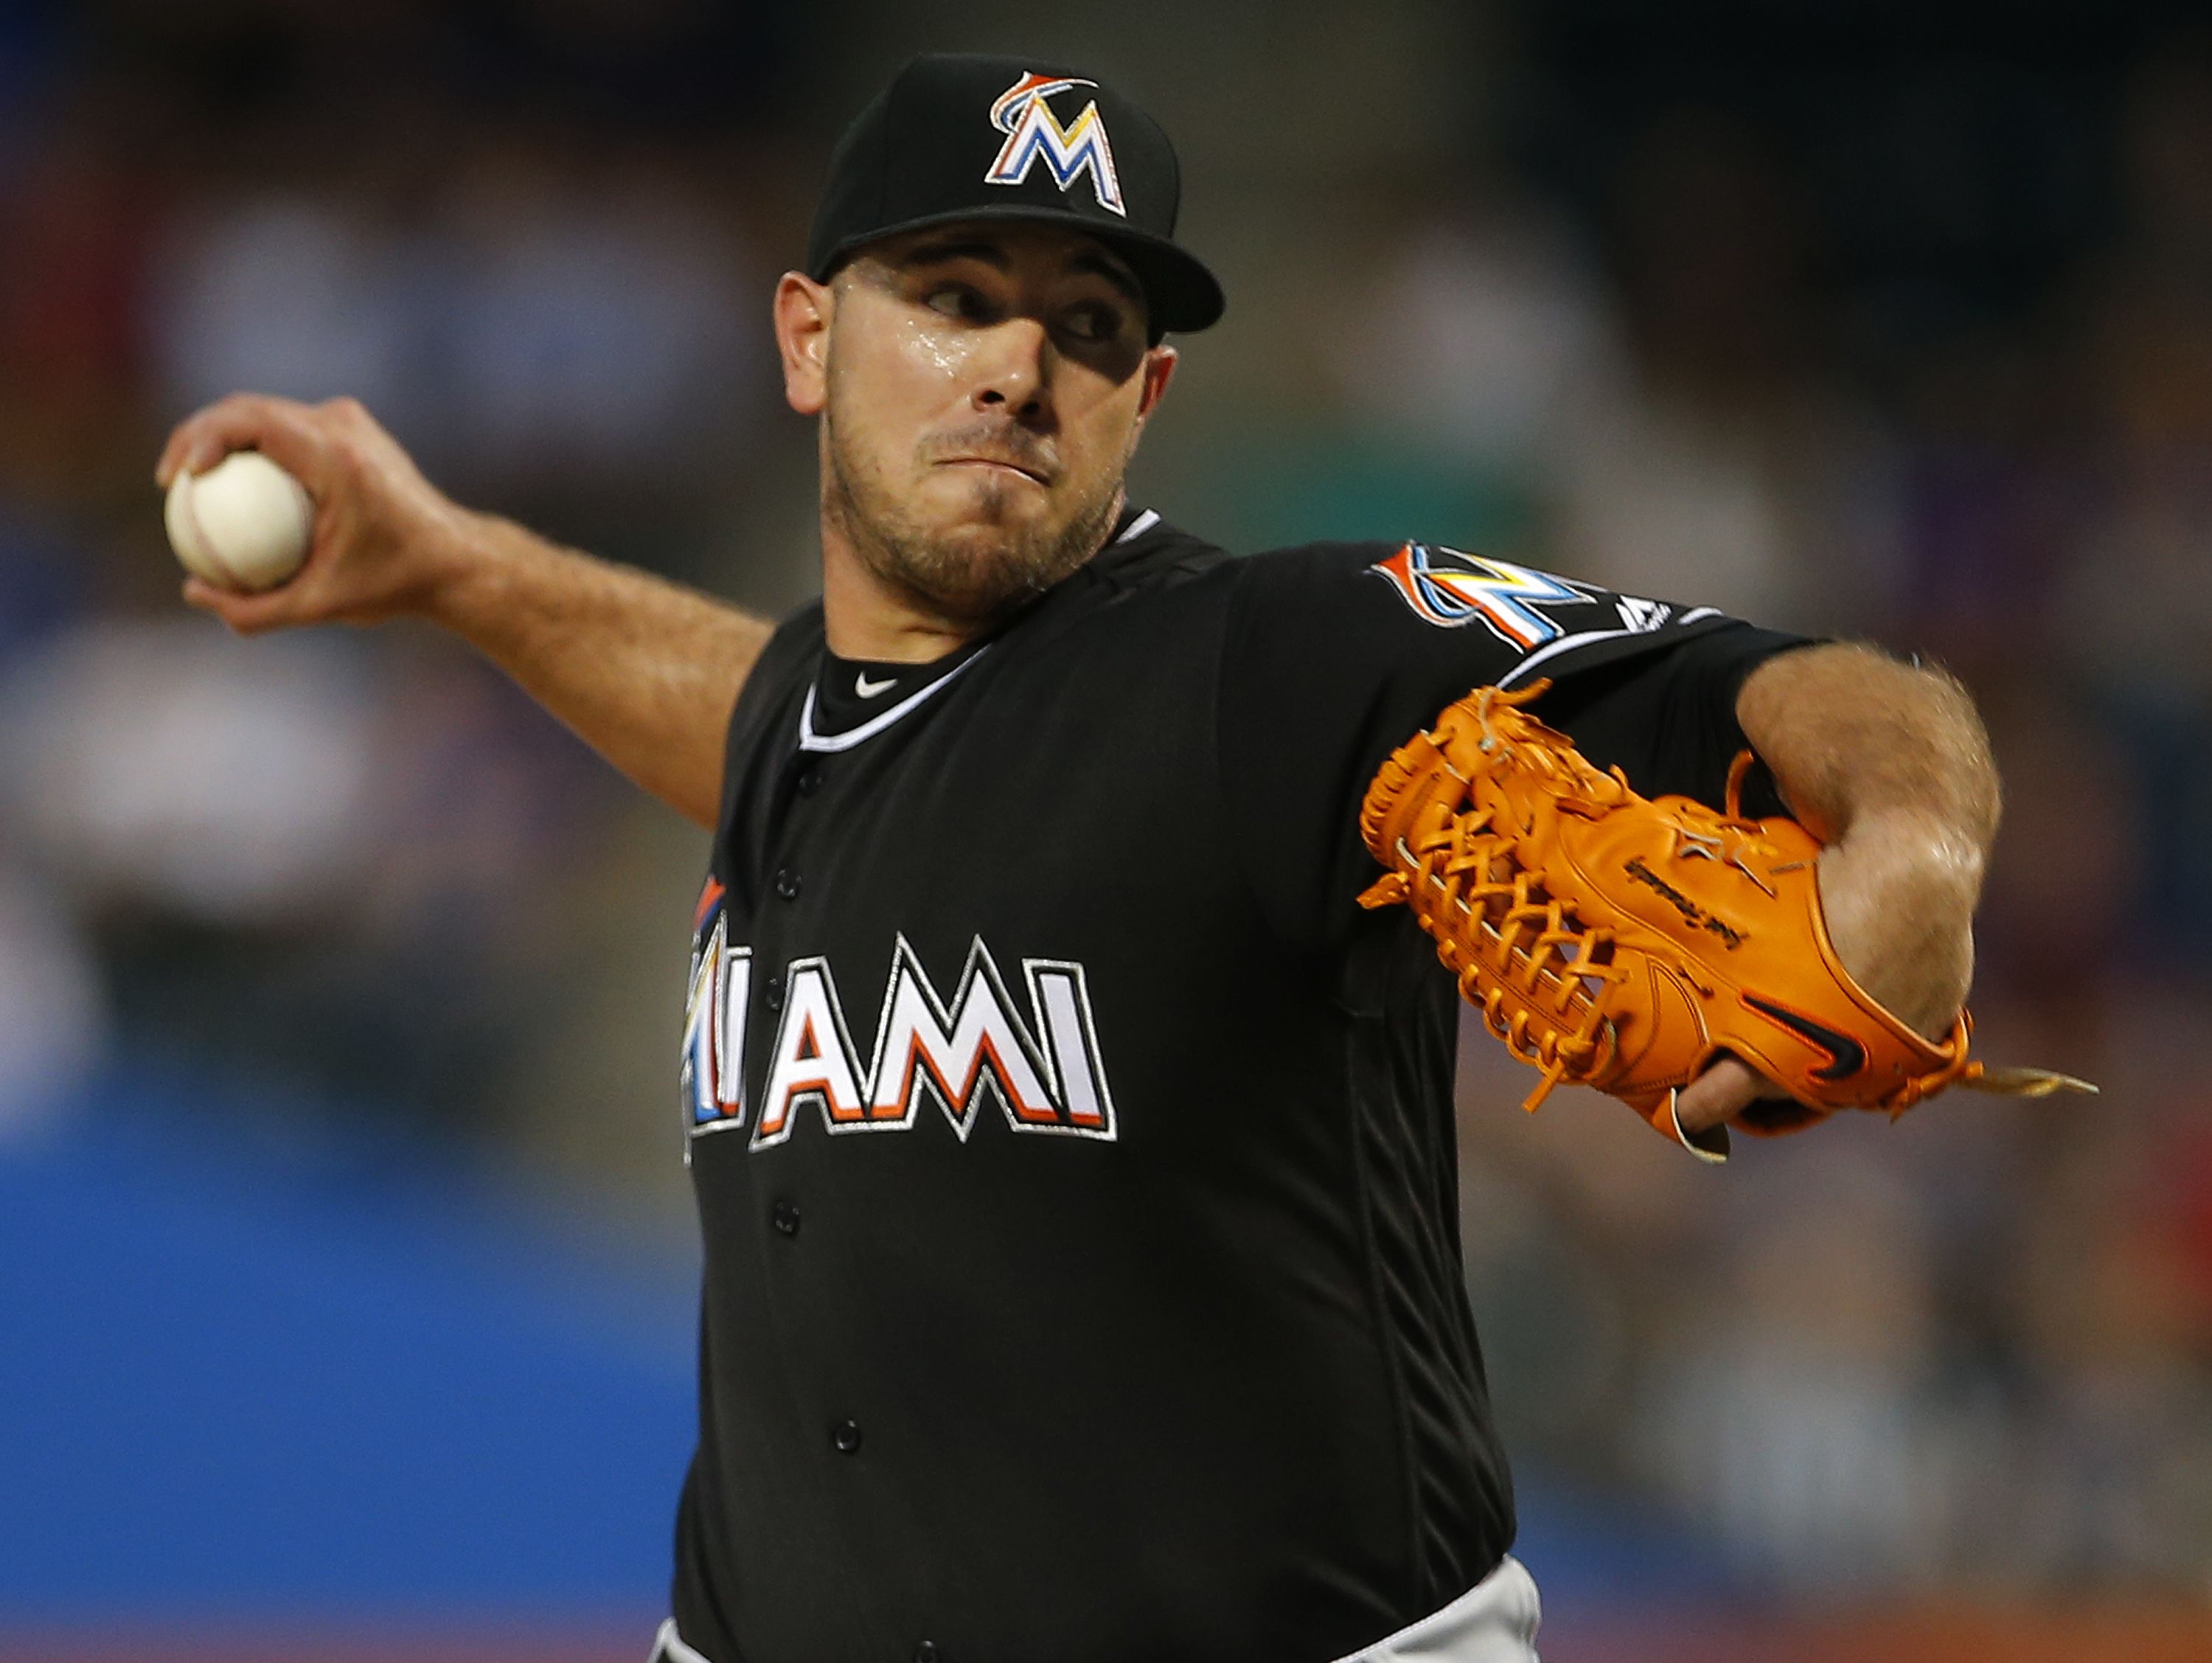 Jose Fernandez's death forever changed the Marlins. And two years later,  it's still impacting several teams - The Athletic